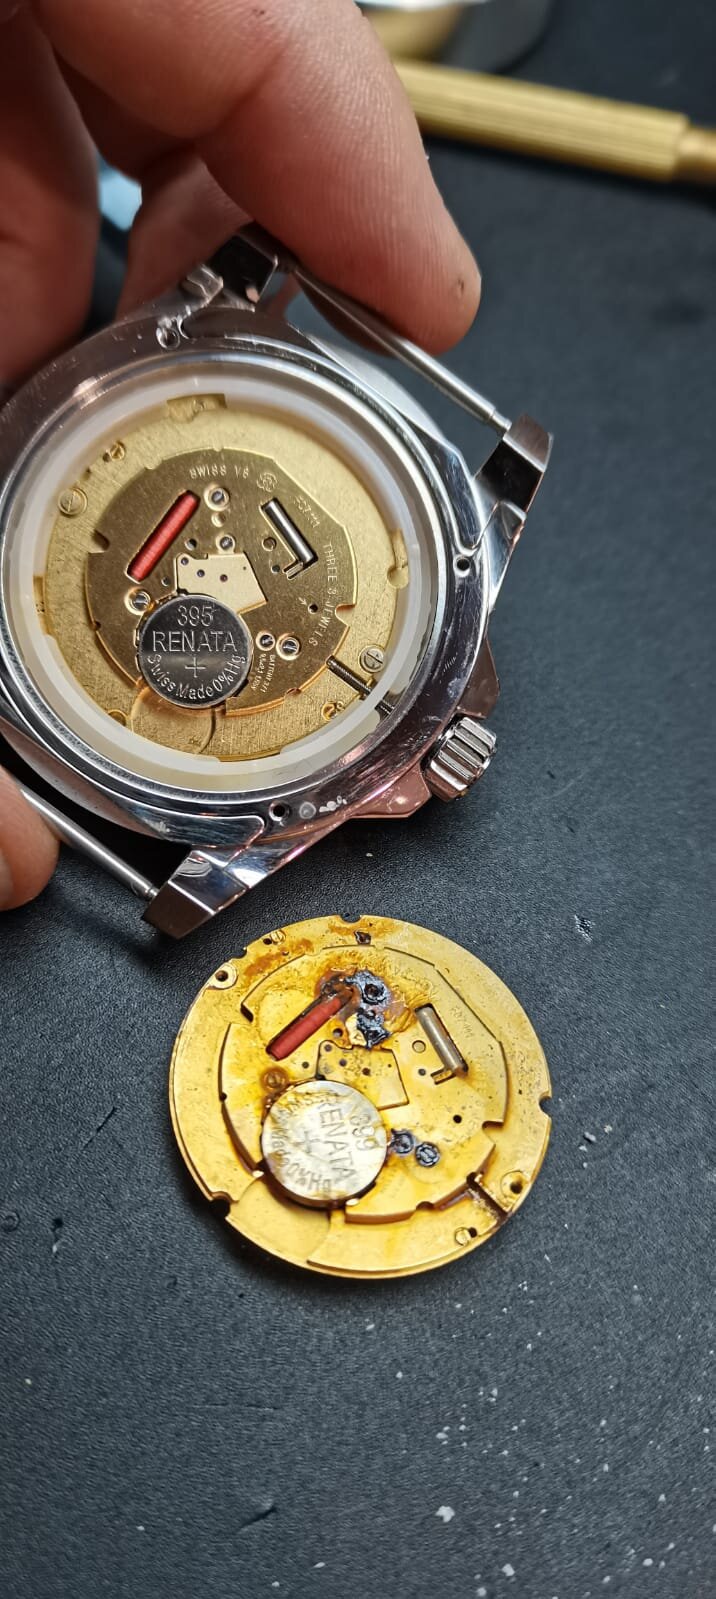 Gucci watch movment rusted inside.jpeg